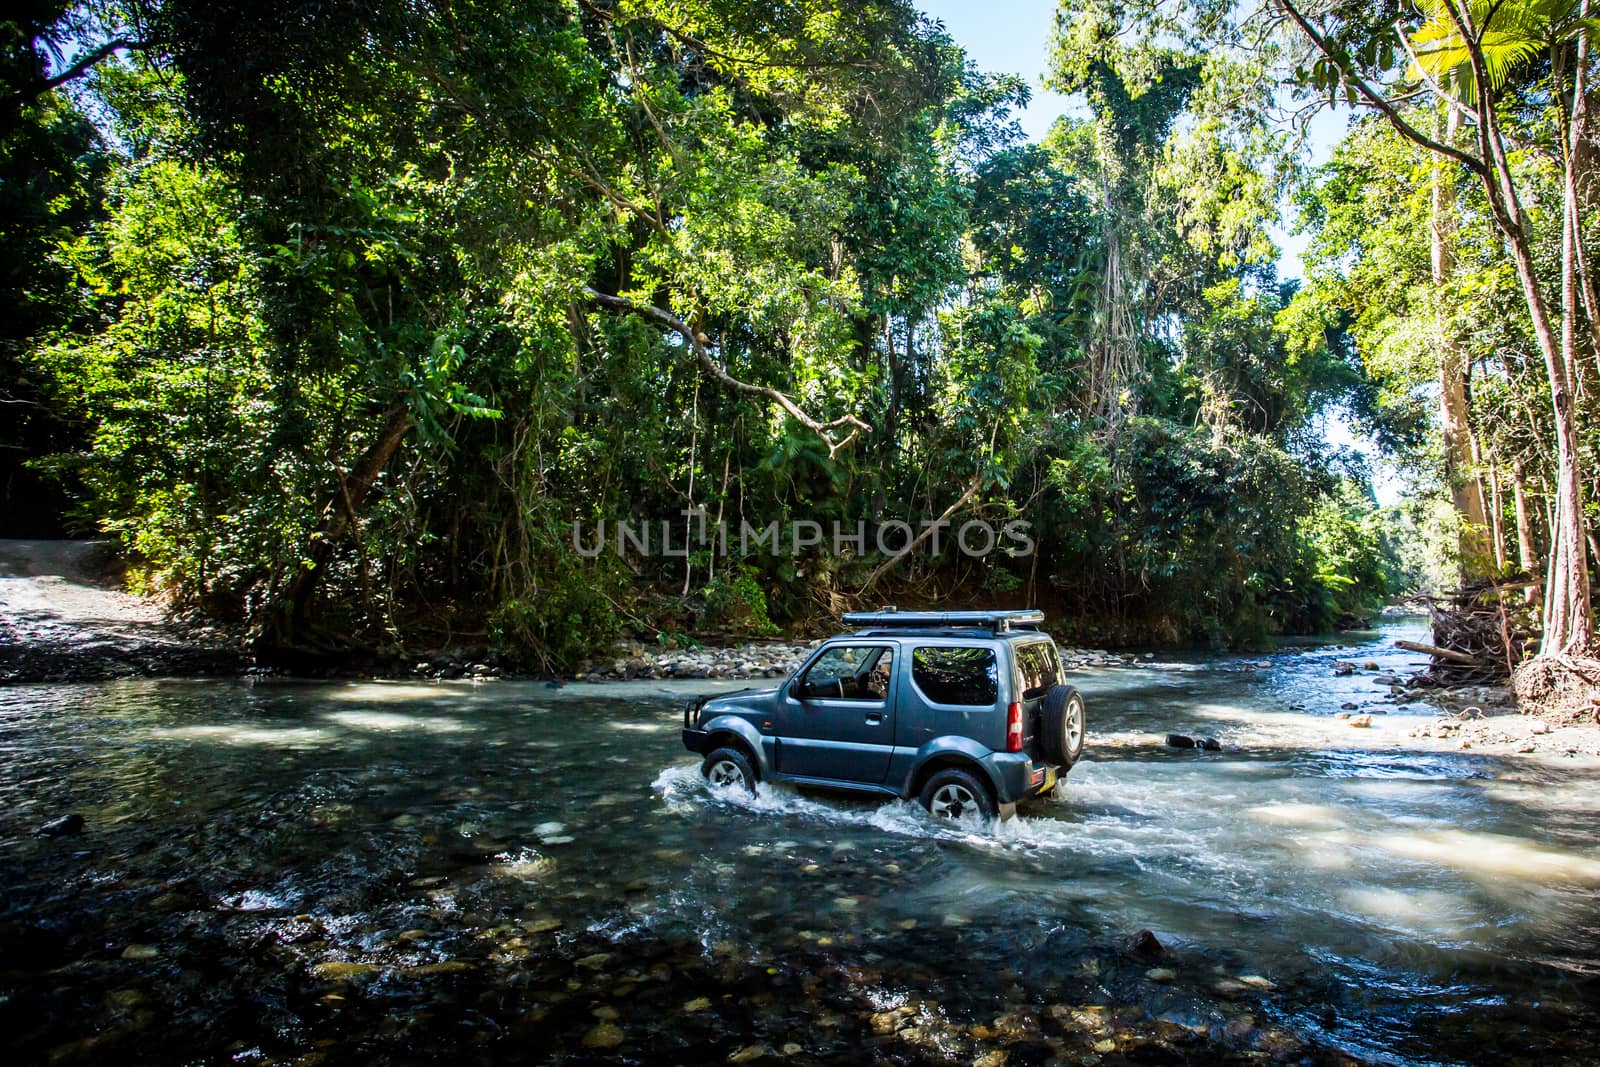 A car drives along Cape Tribulation Rd and crosses a river near Cape Tribulation in the Daintree, Queensland, Australia